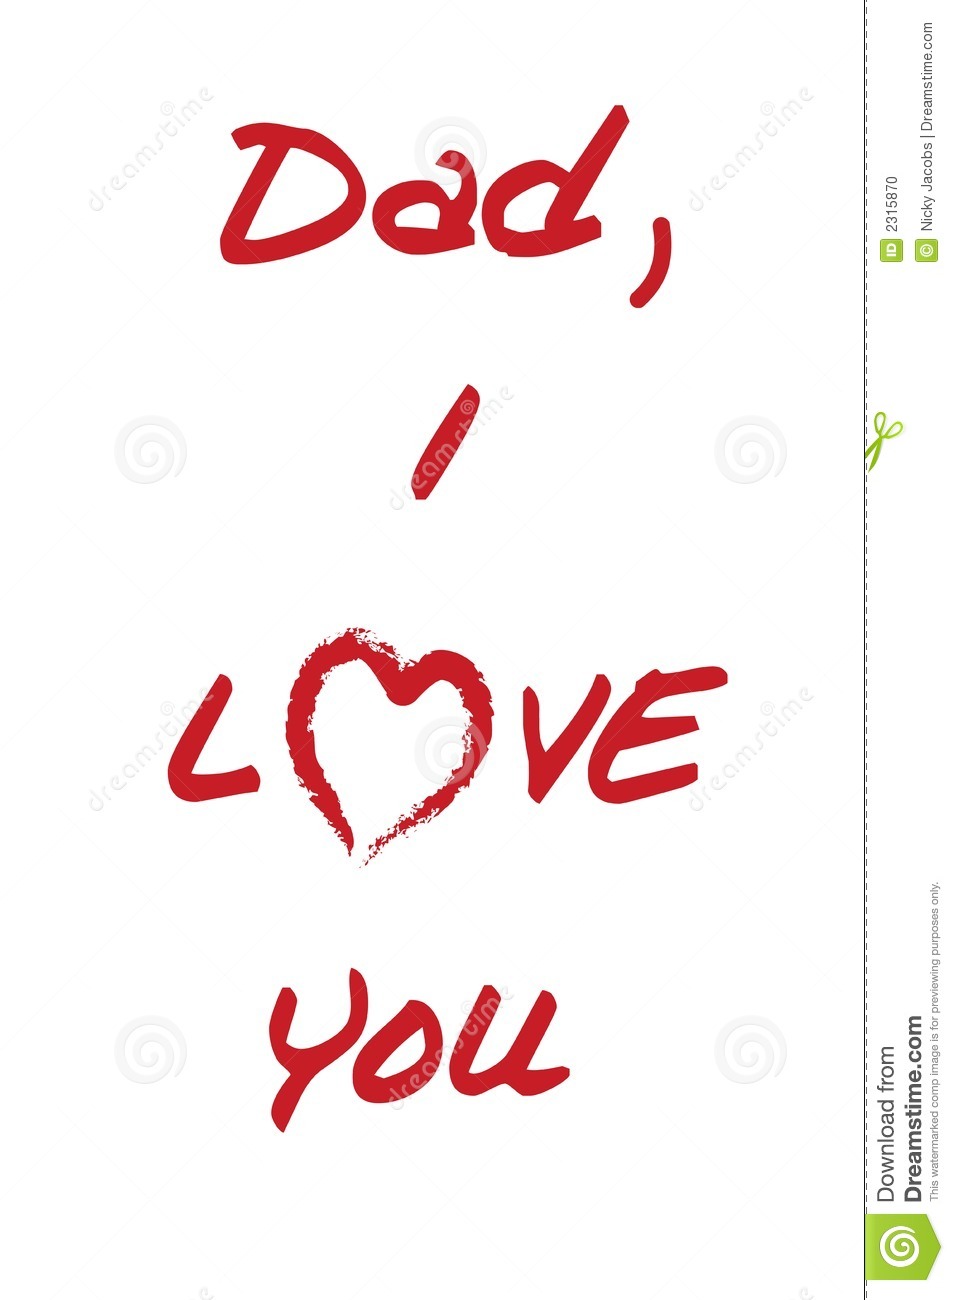 Love You Dad Clipart Dad I Love You 2315870 Jpg